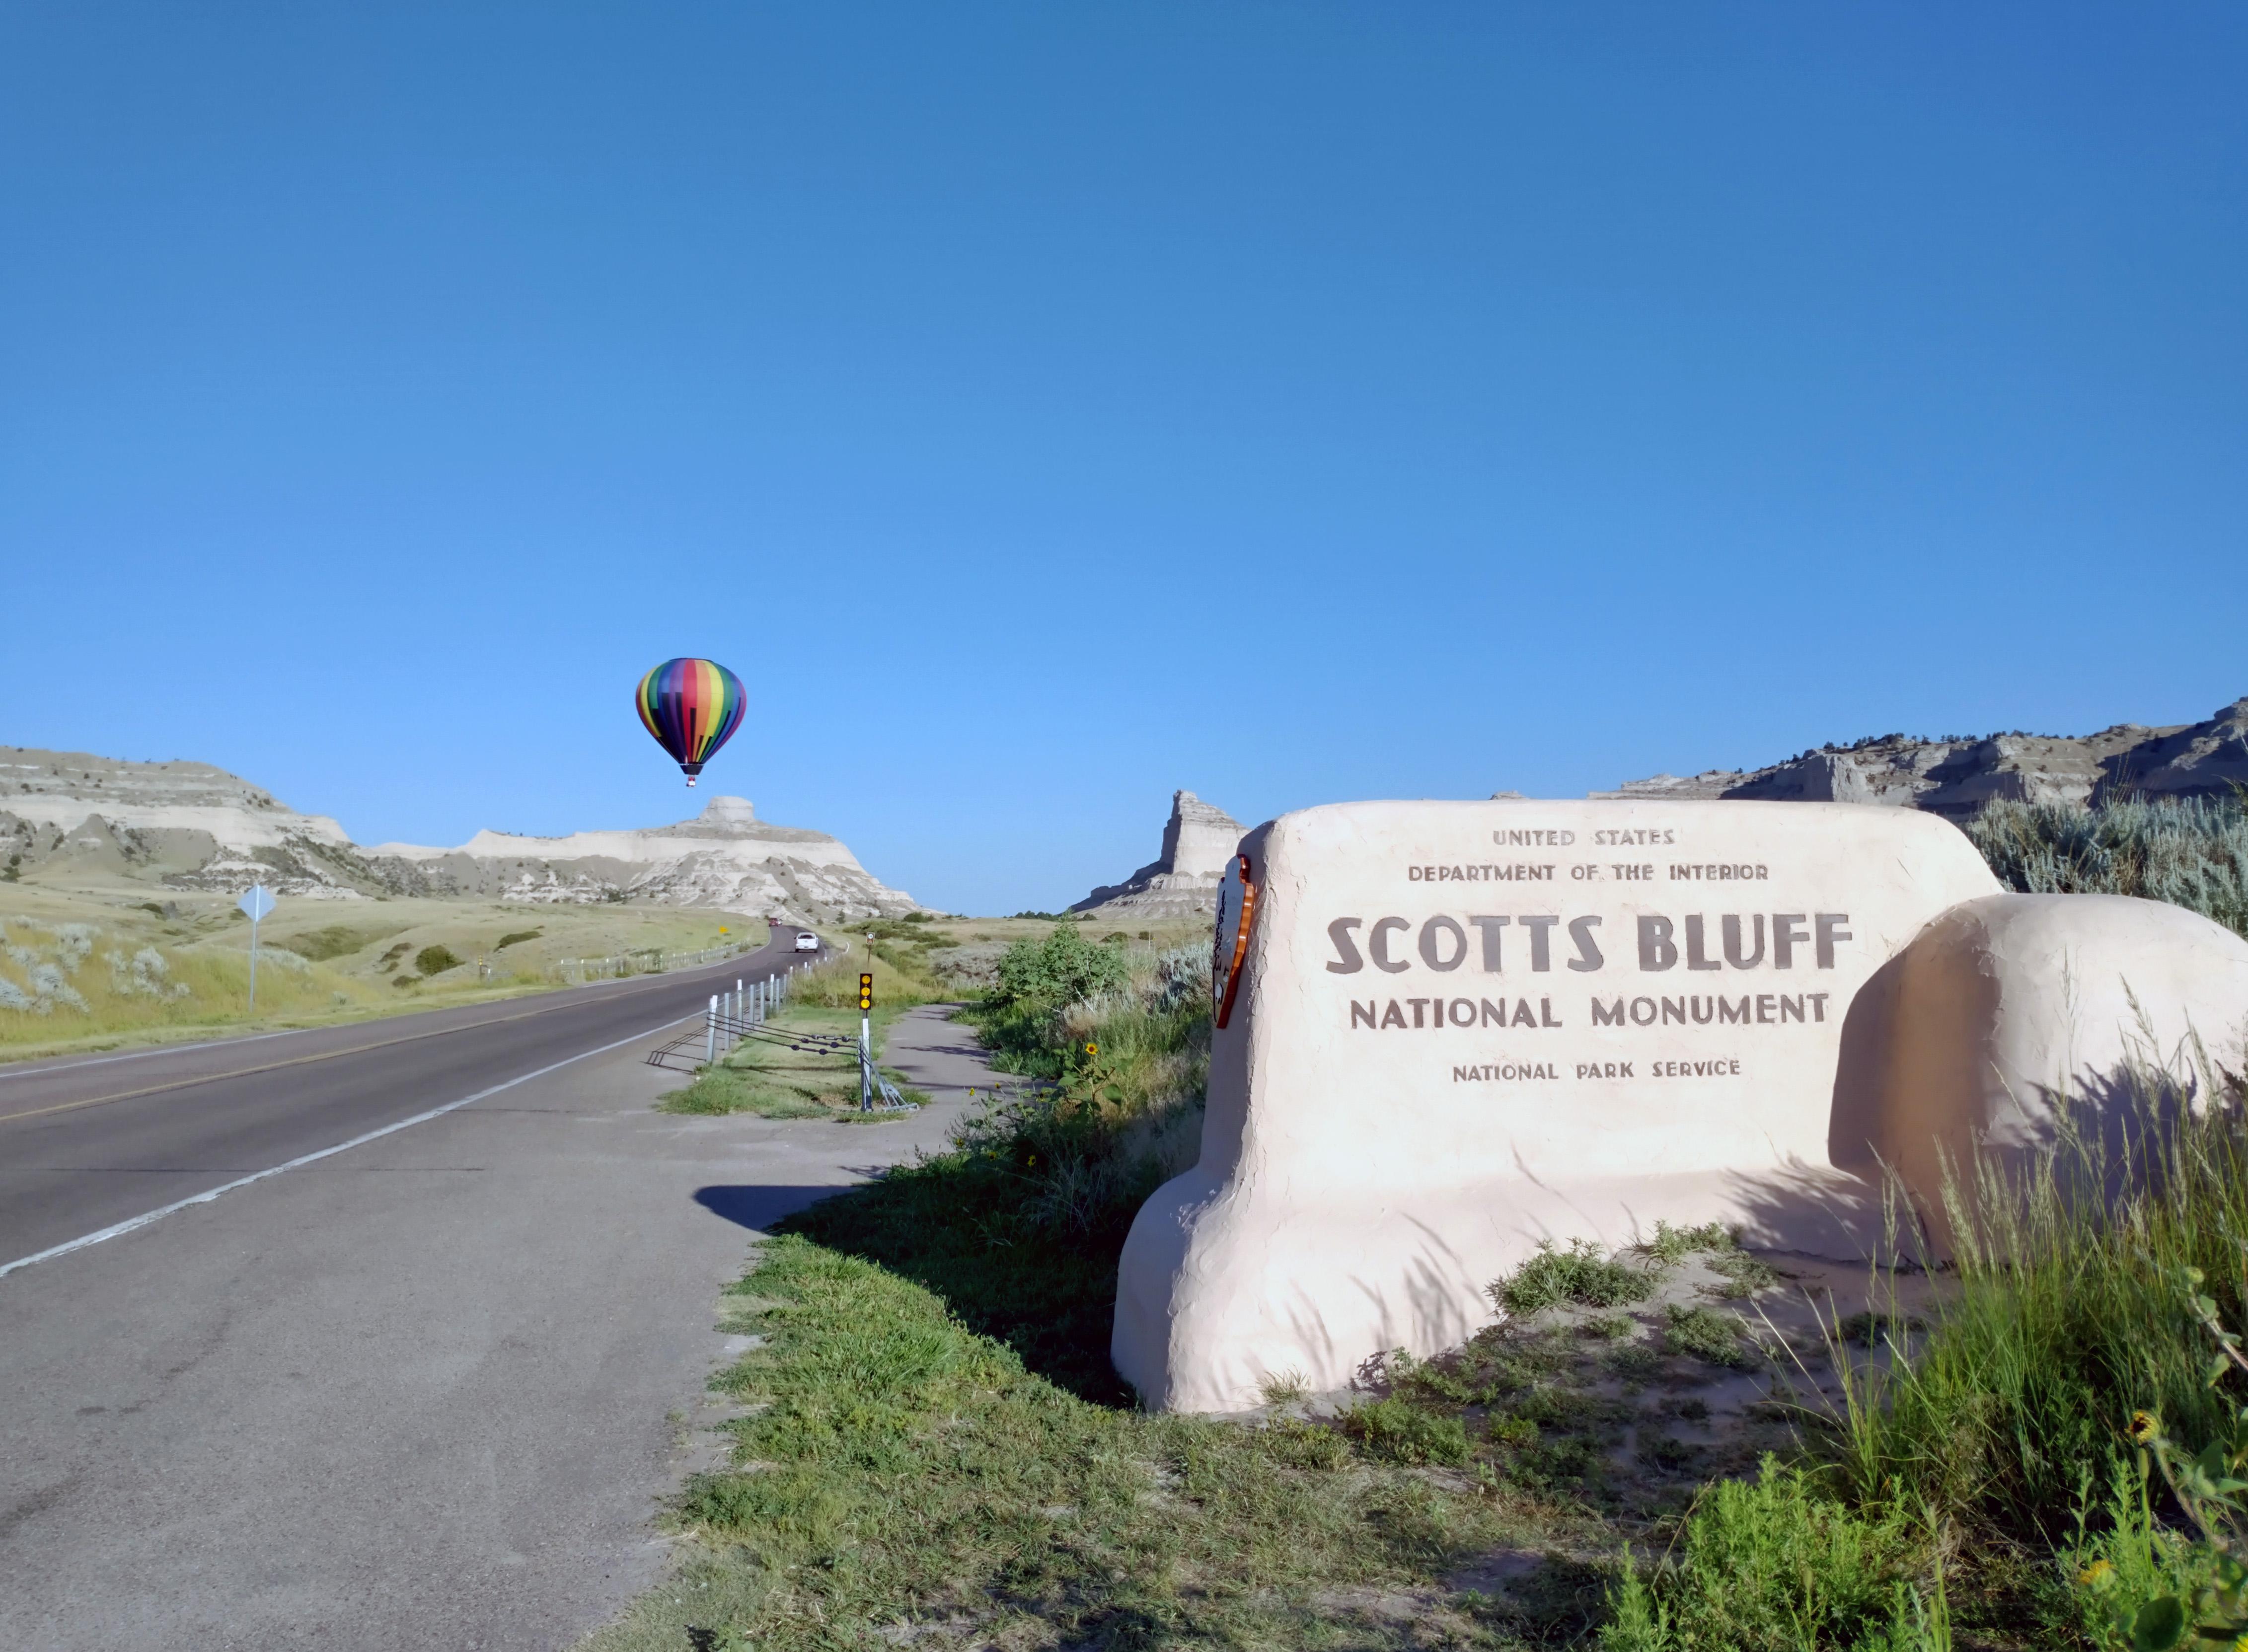 A Hot Air Balloon at the East Entrance to the Monument